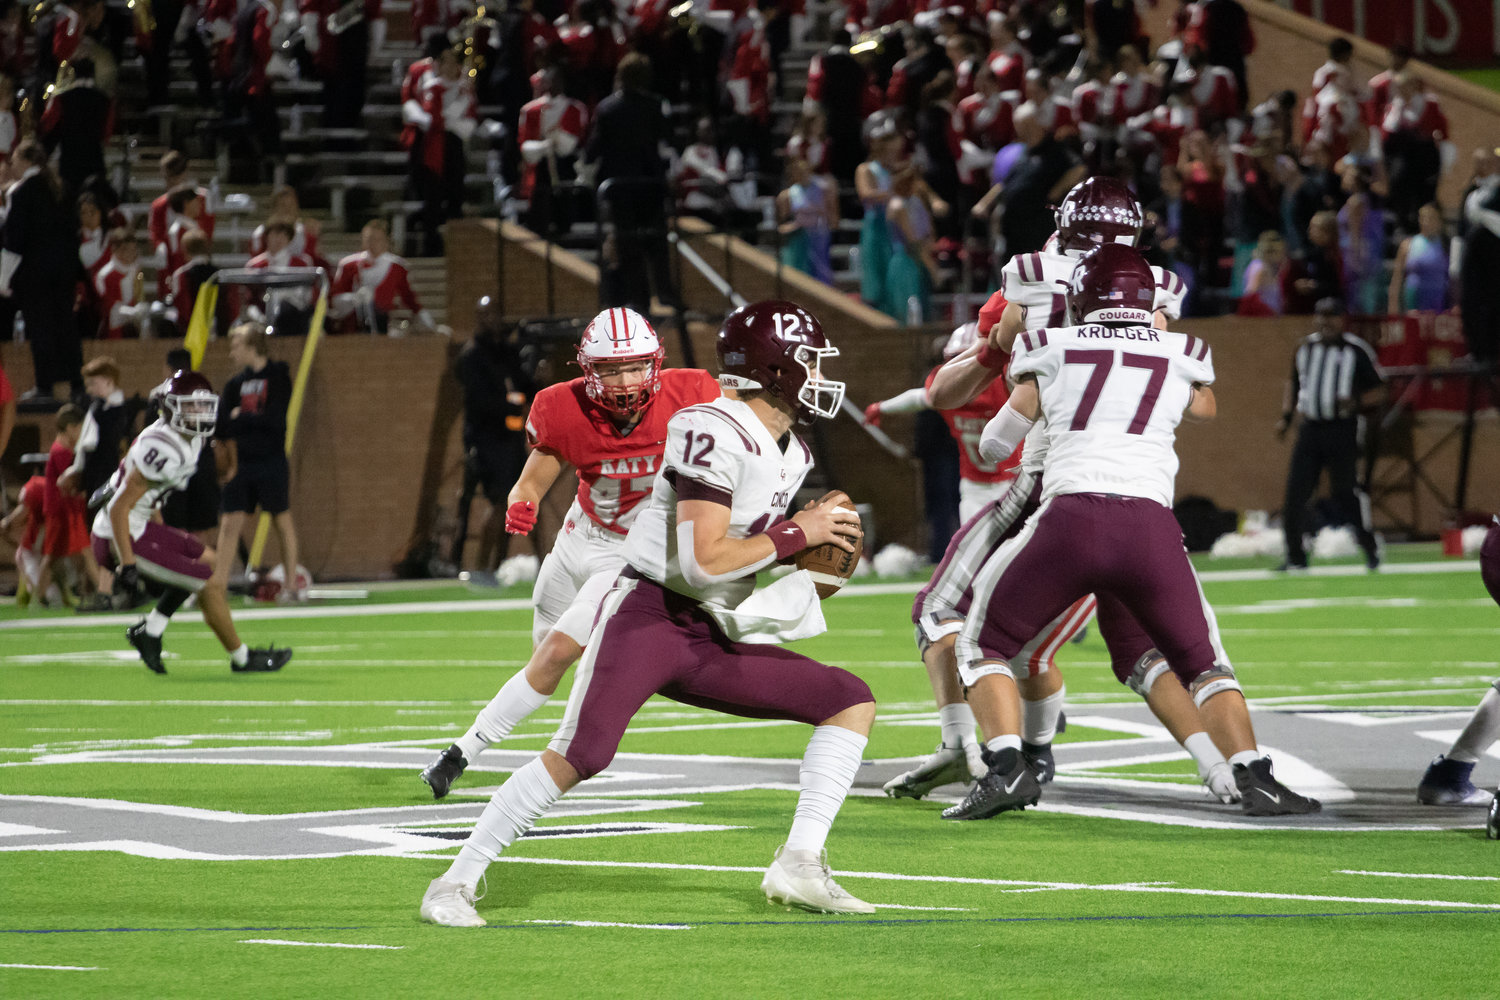 Cinco Ranch quarterback Gavin Rutherford drops back to pass during Friday's game between Katy and Cinco Ranch at Rhodes Stadium.